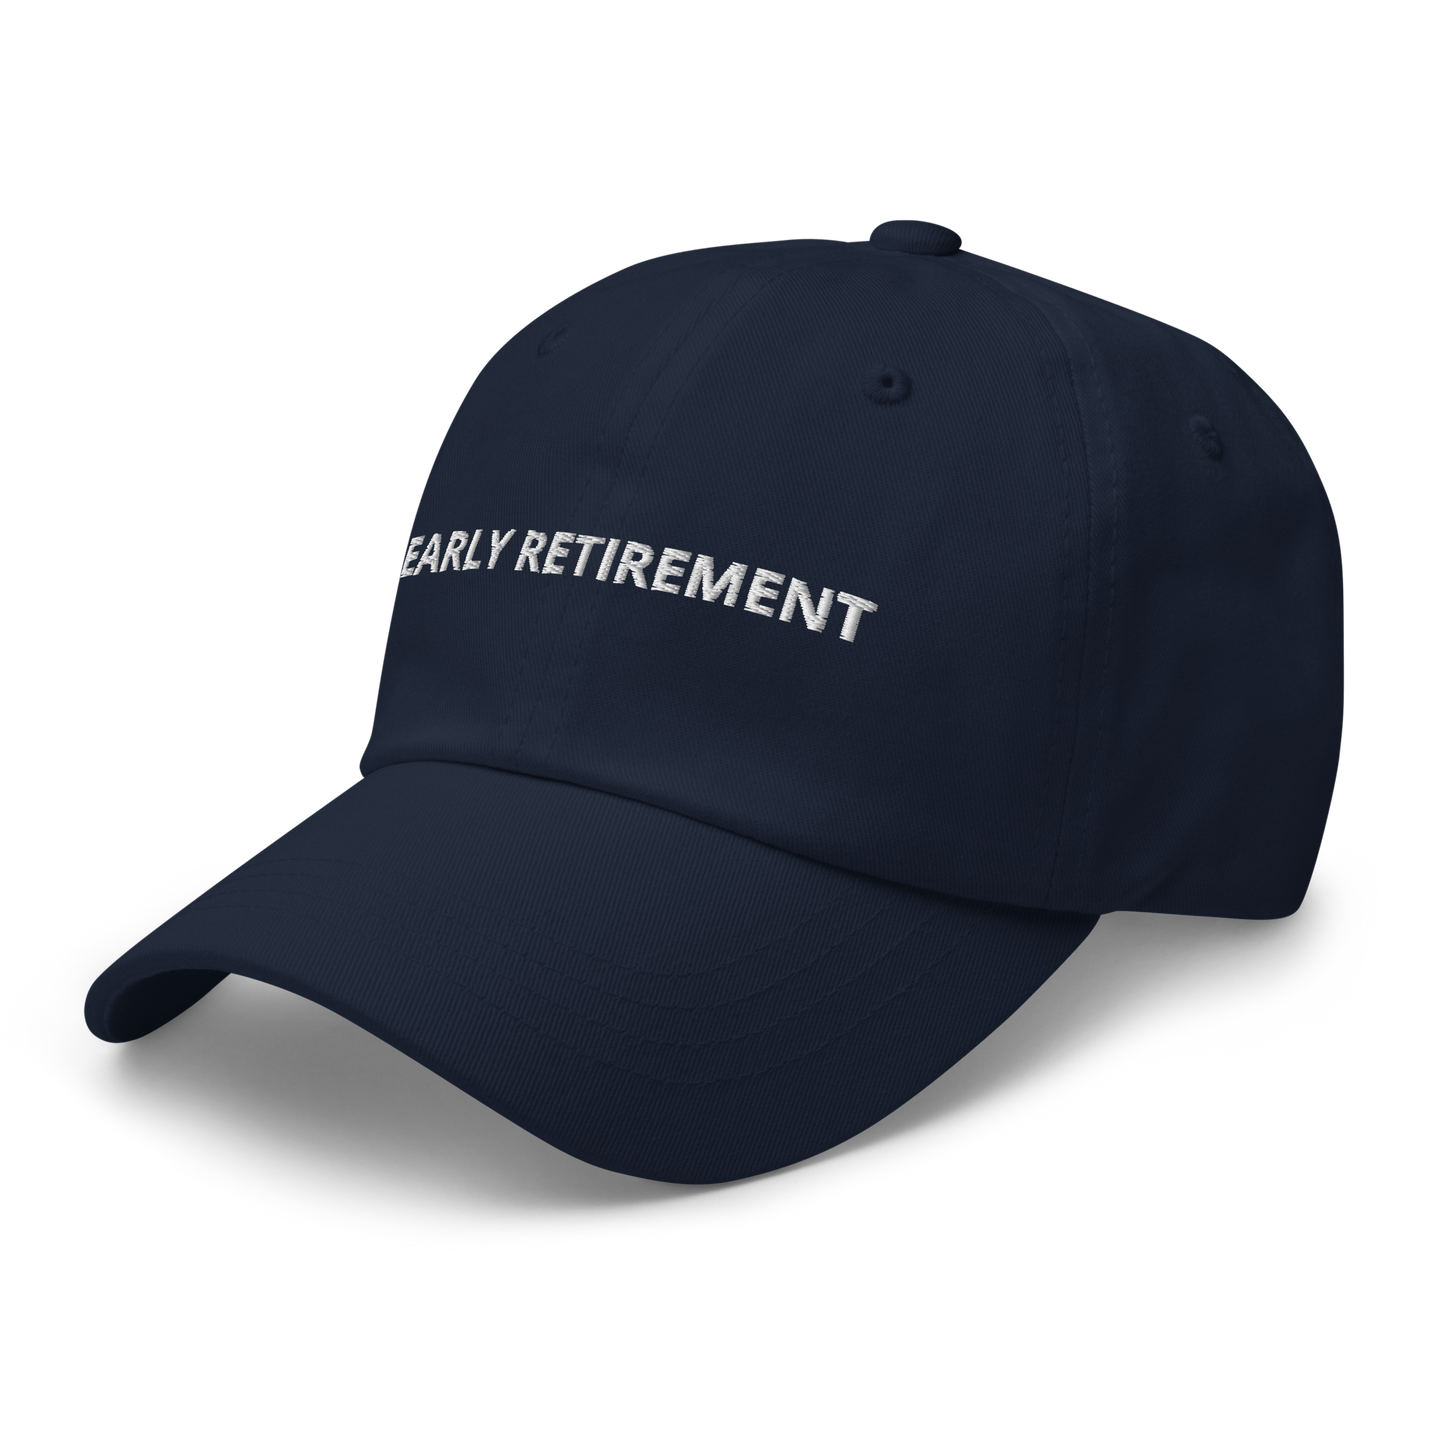 EARLY RETIREMENT (Navy)